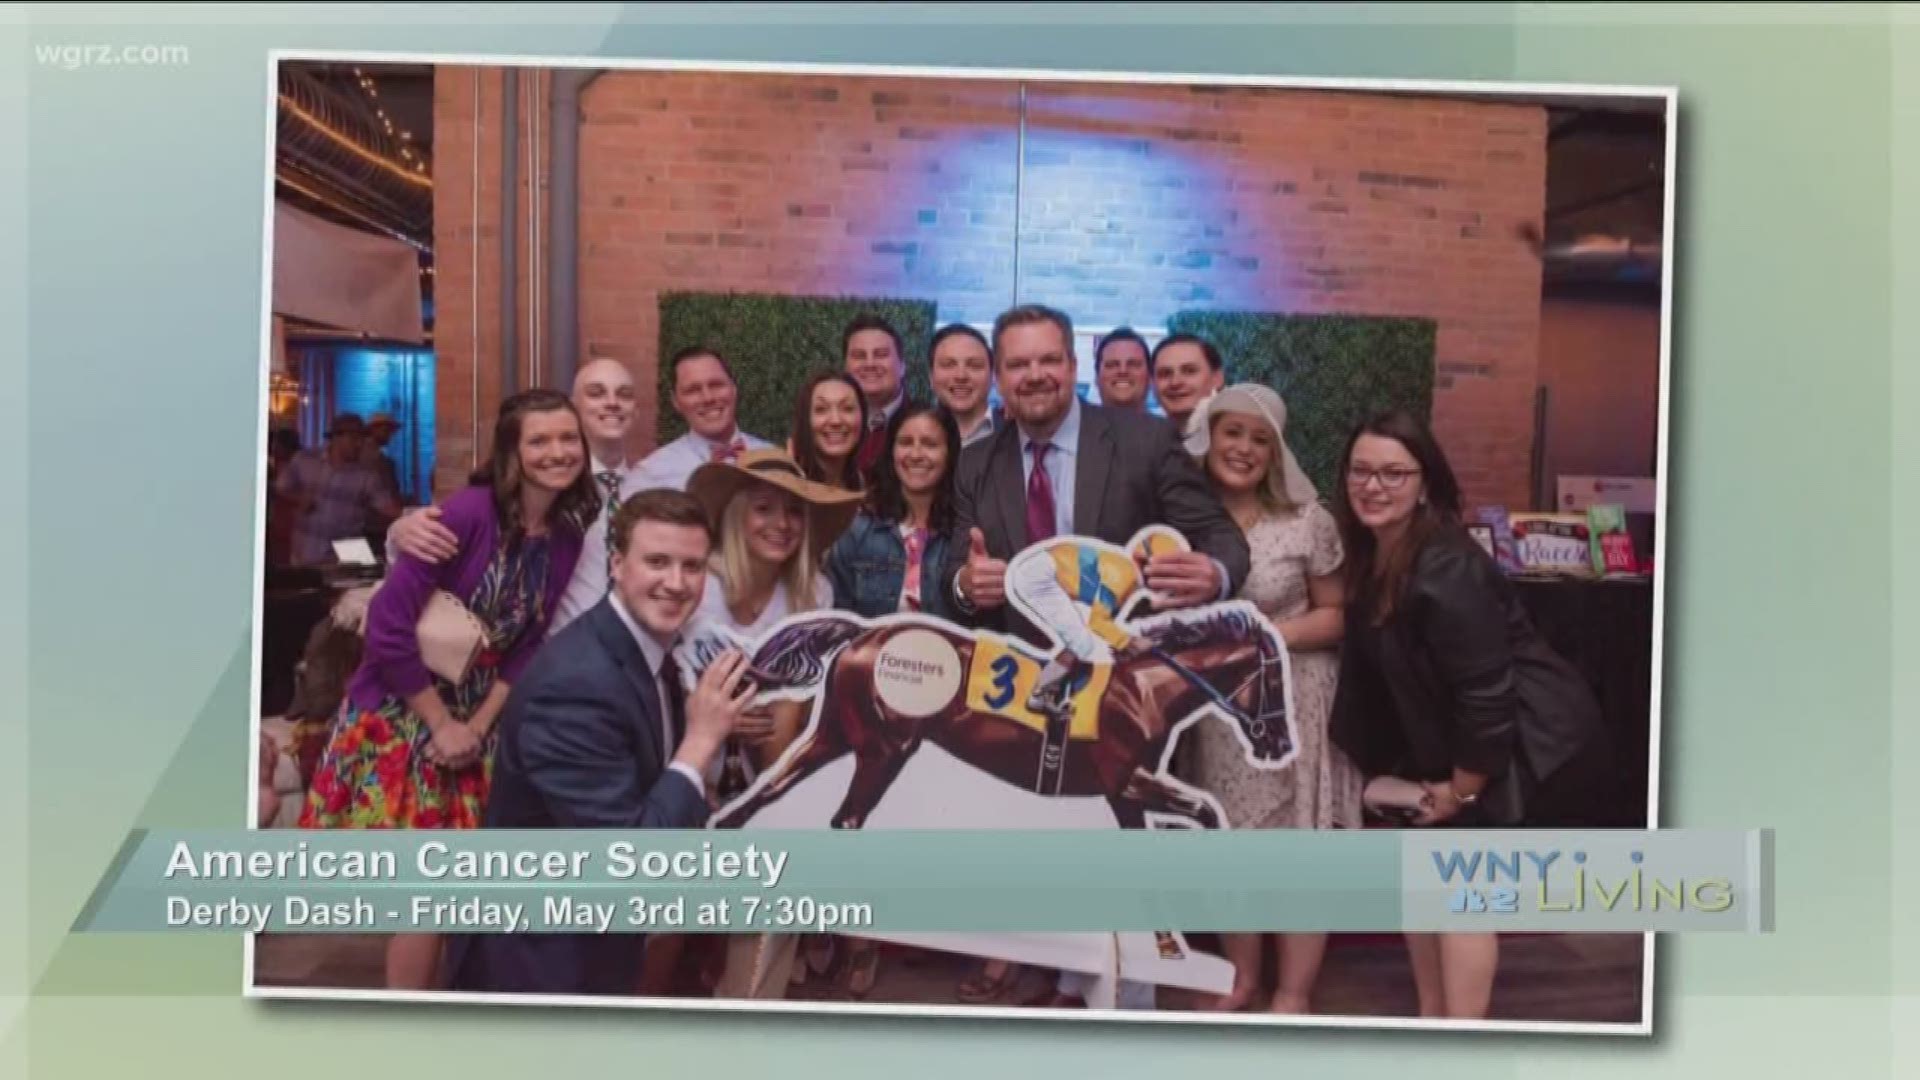 WNY Living - April 20 - American Cancer Society (SPONSORED CONTENT)